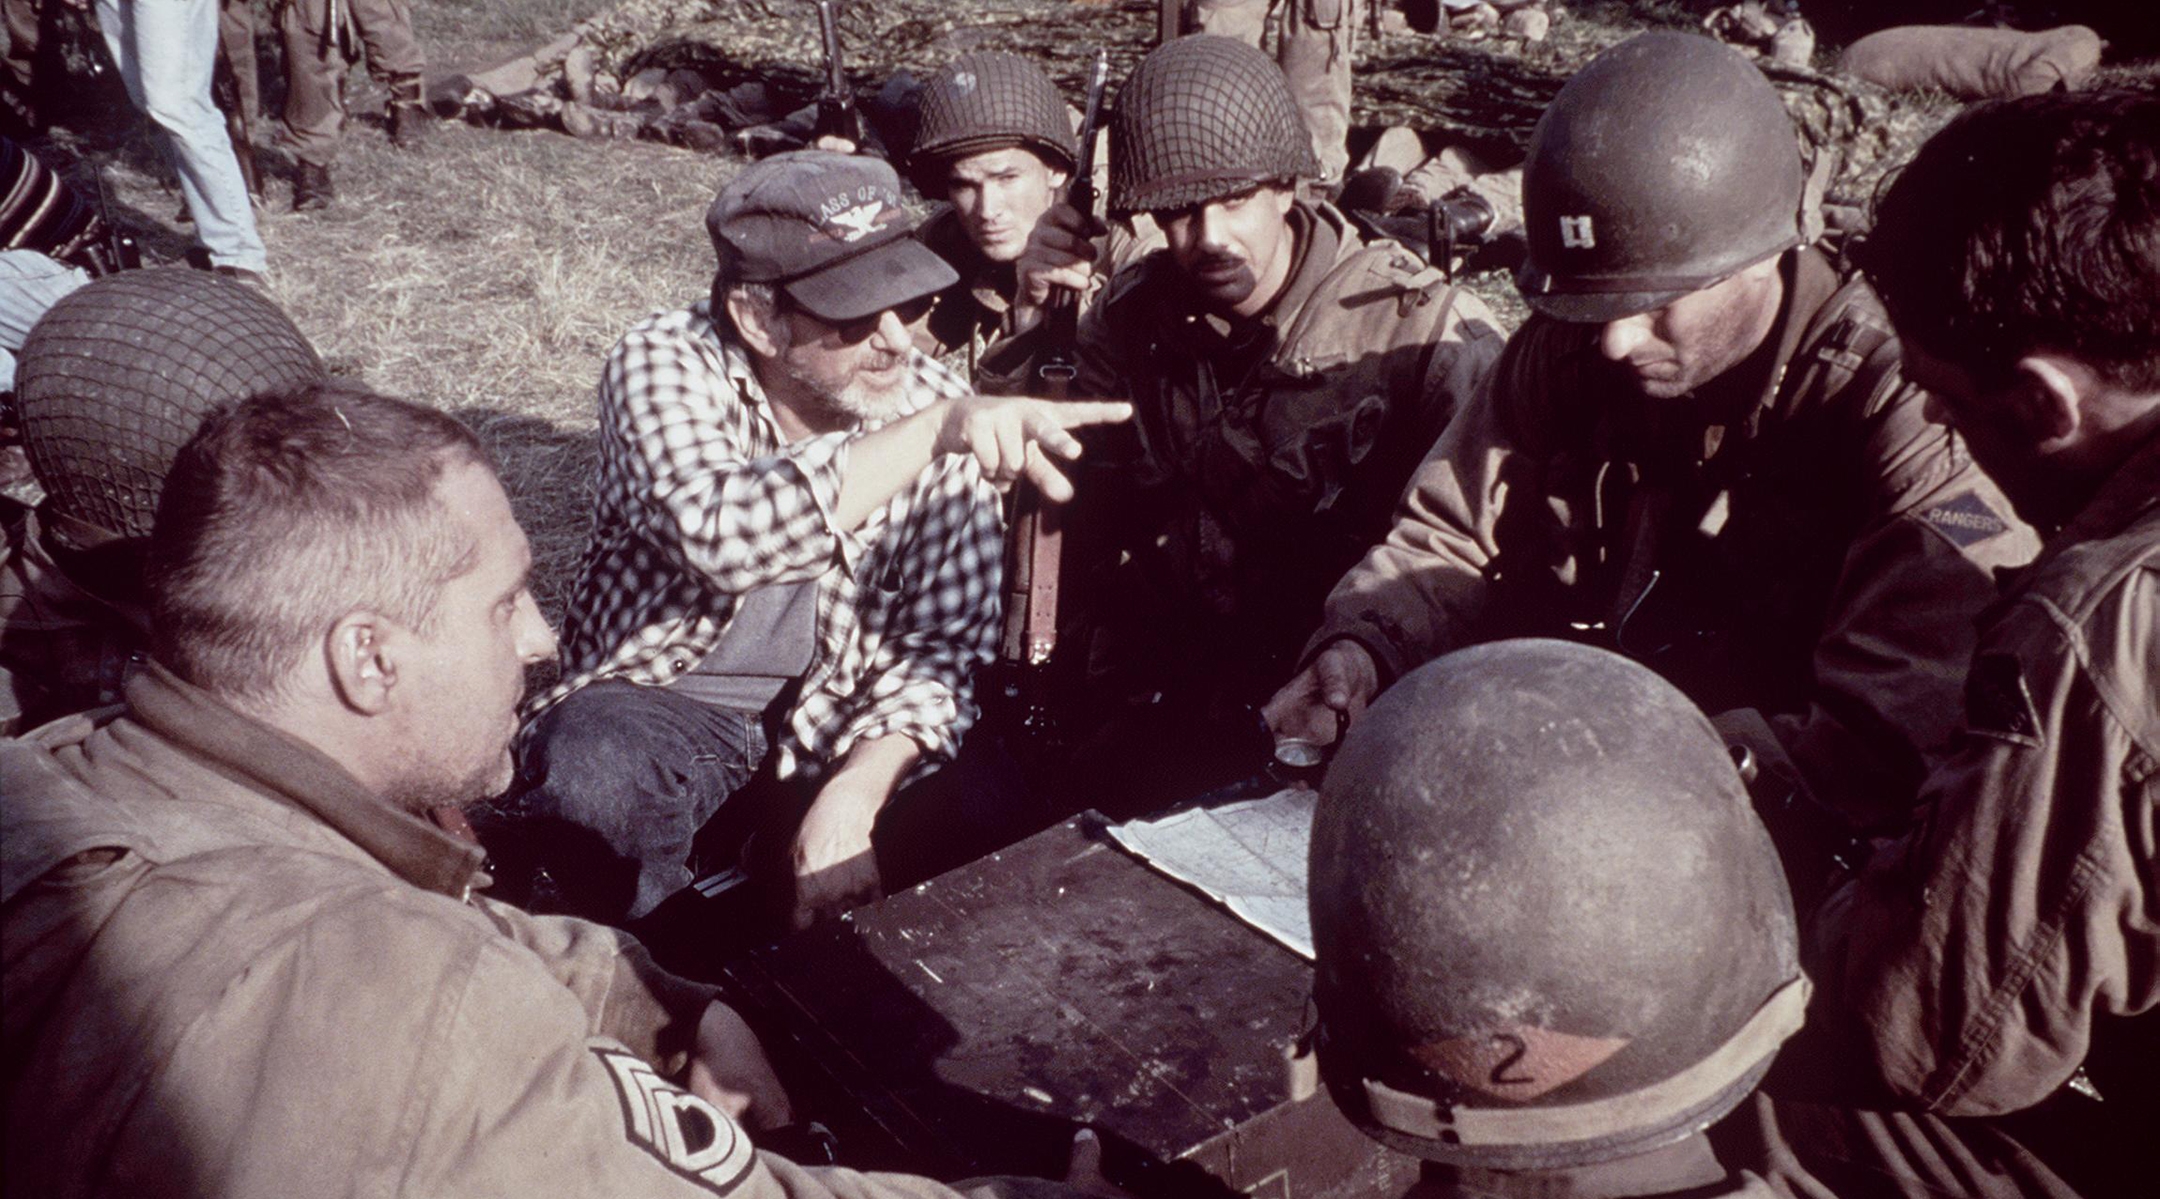 Steven Spielberg directs his cast on the set of “Saving Private Ryan,” Jun 5, 1998. (Getty Images)